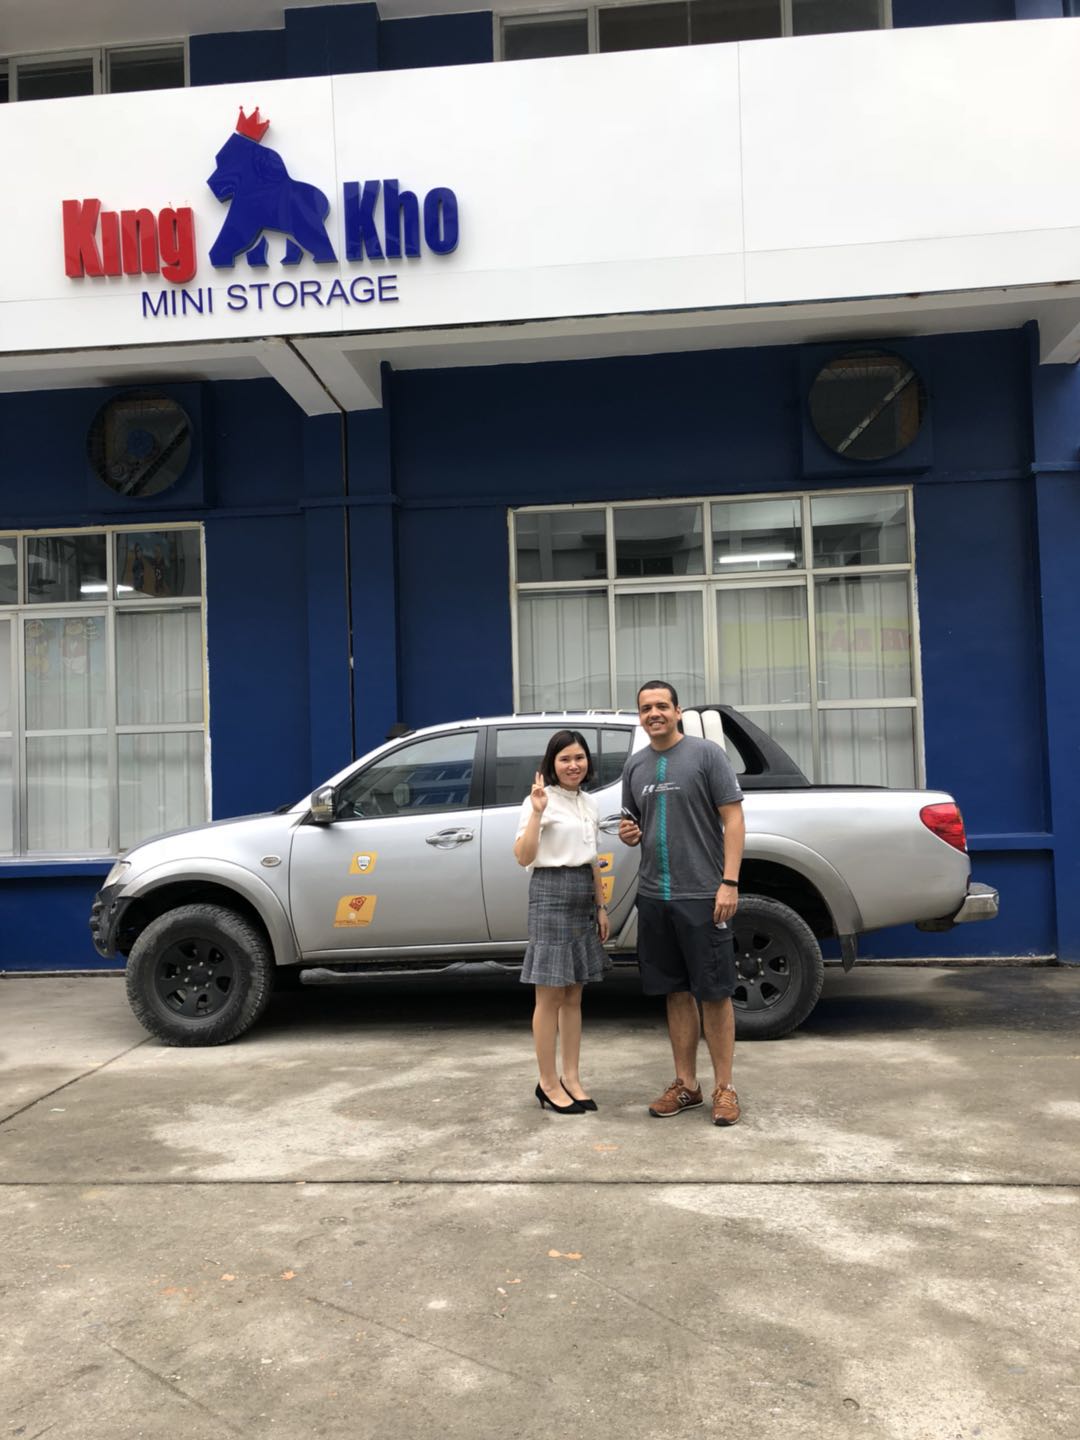 Self Storage Facility Manager Ms Ly posing with KingKho Hano's First Customer